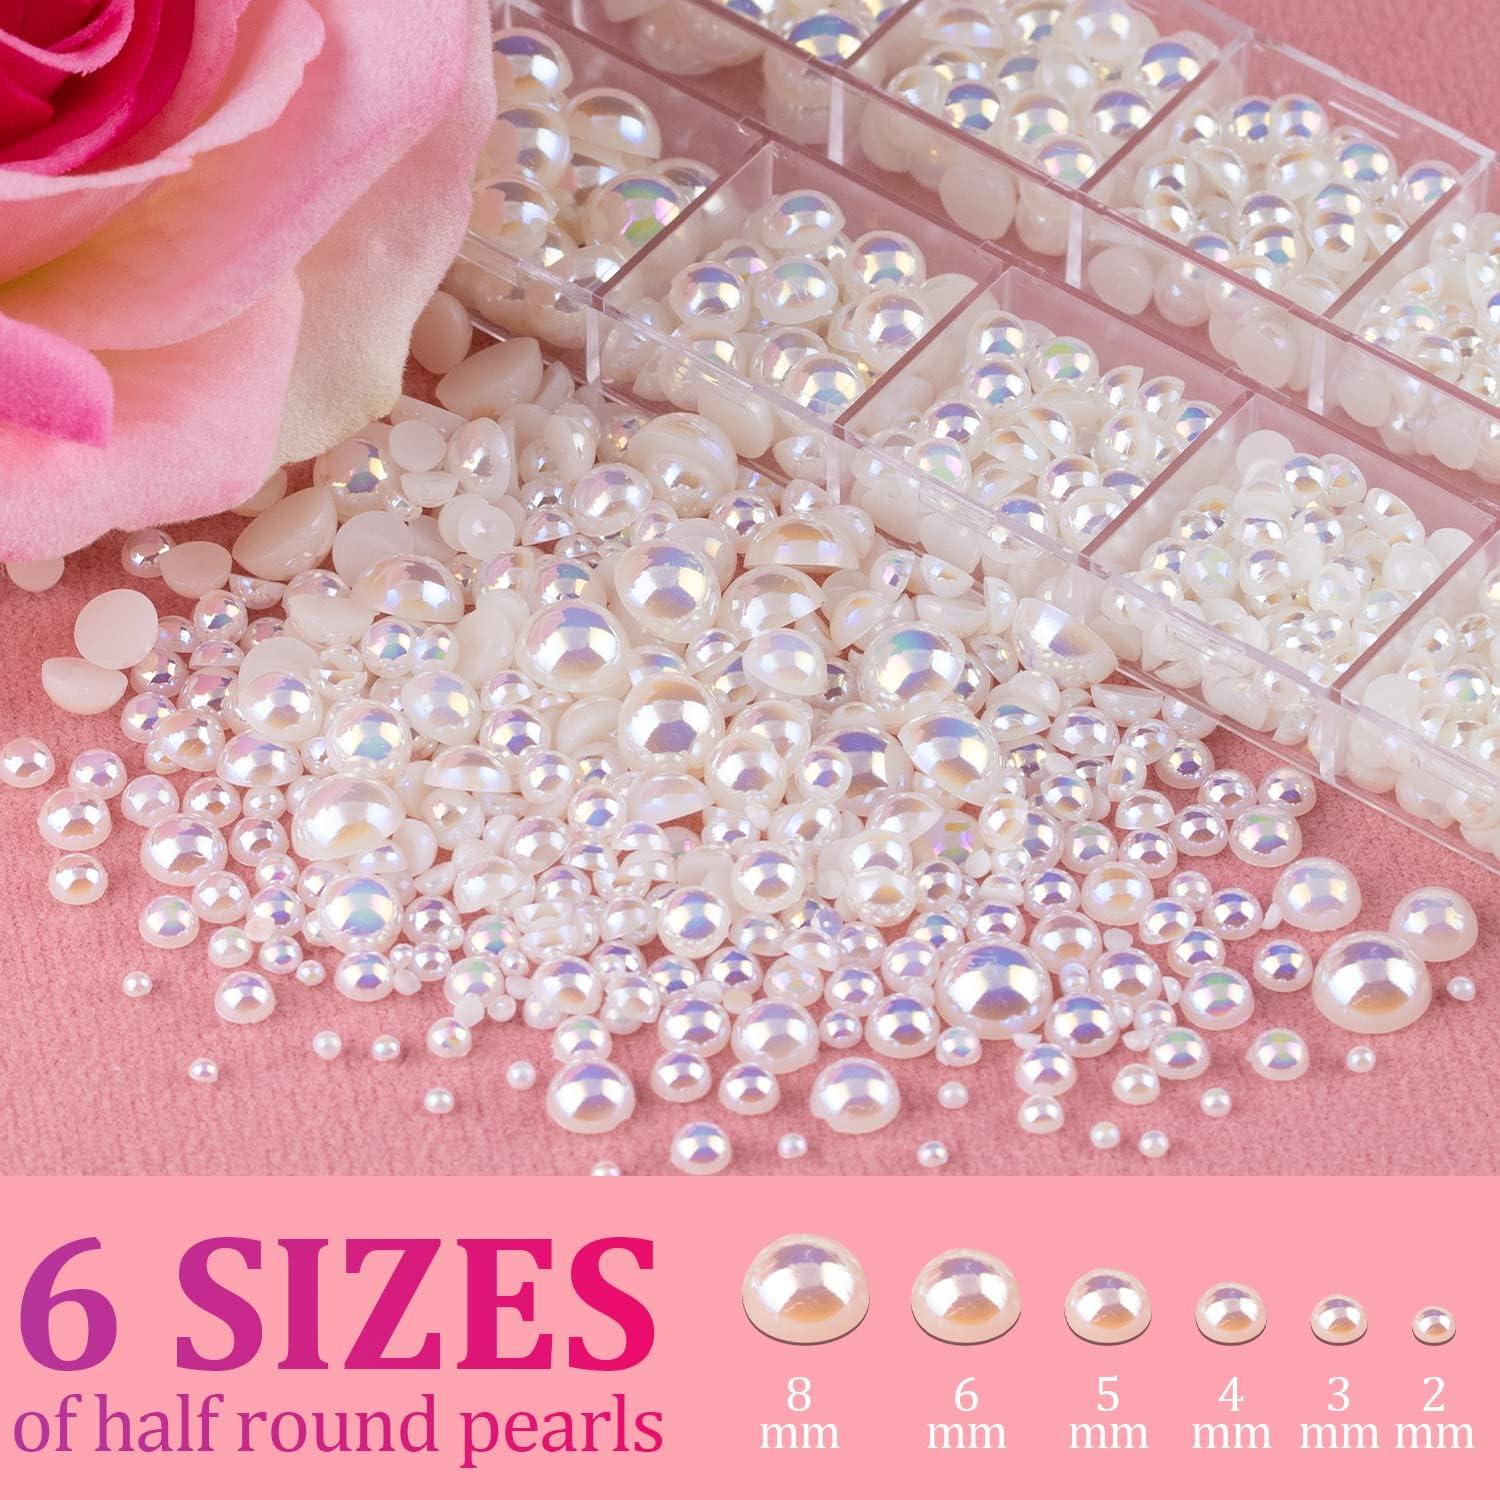 2700 Pcs Flat Back Pearls Kits 1 Box of Flatback White+1 Box of Beige Half  Round Pearls with Pickup Pencil And Tweezer for Home DIY And Professional  Nail Art, Face Makeup And